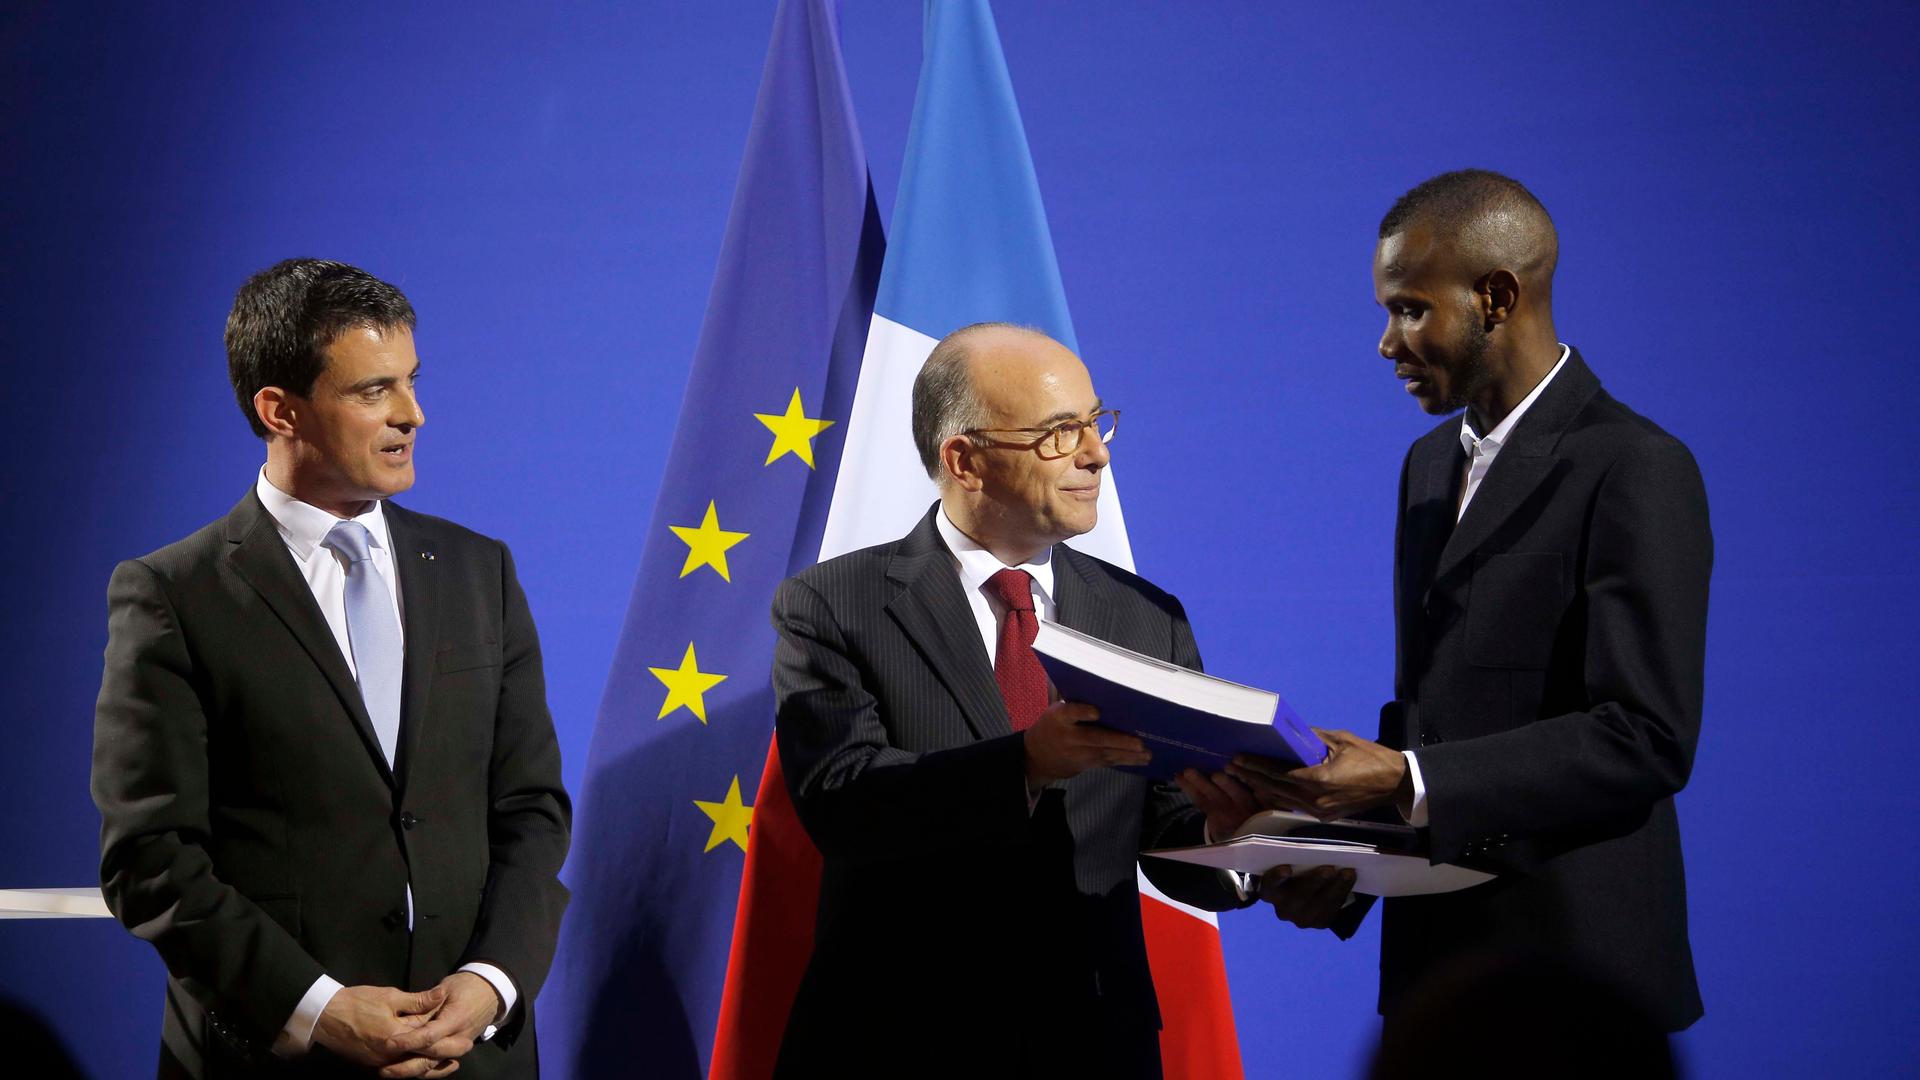 French Prime Minister Manuel Valls, left, and French Interior Minister Bernard Cazeneuve, center, award citizenship to Lassana Bathily during a ceremony in Paris, Jan. 20, 2015.